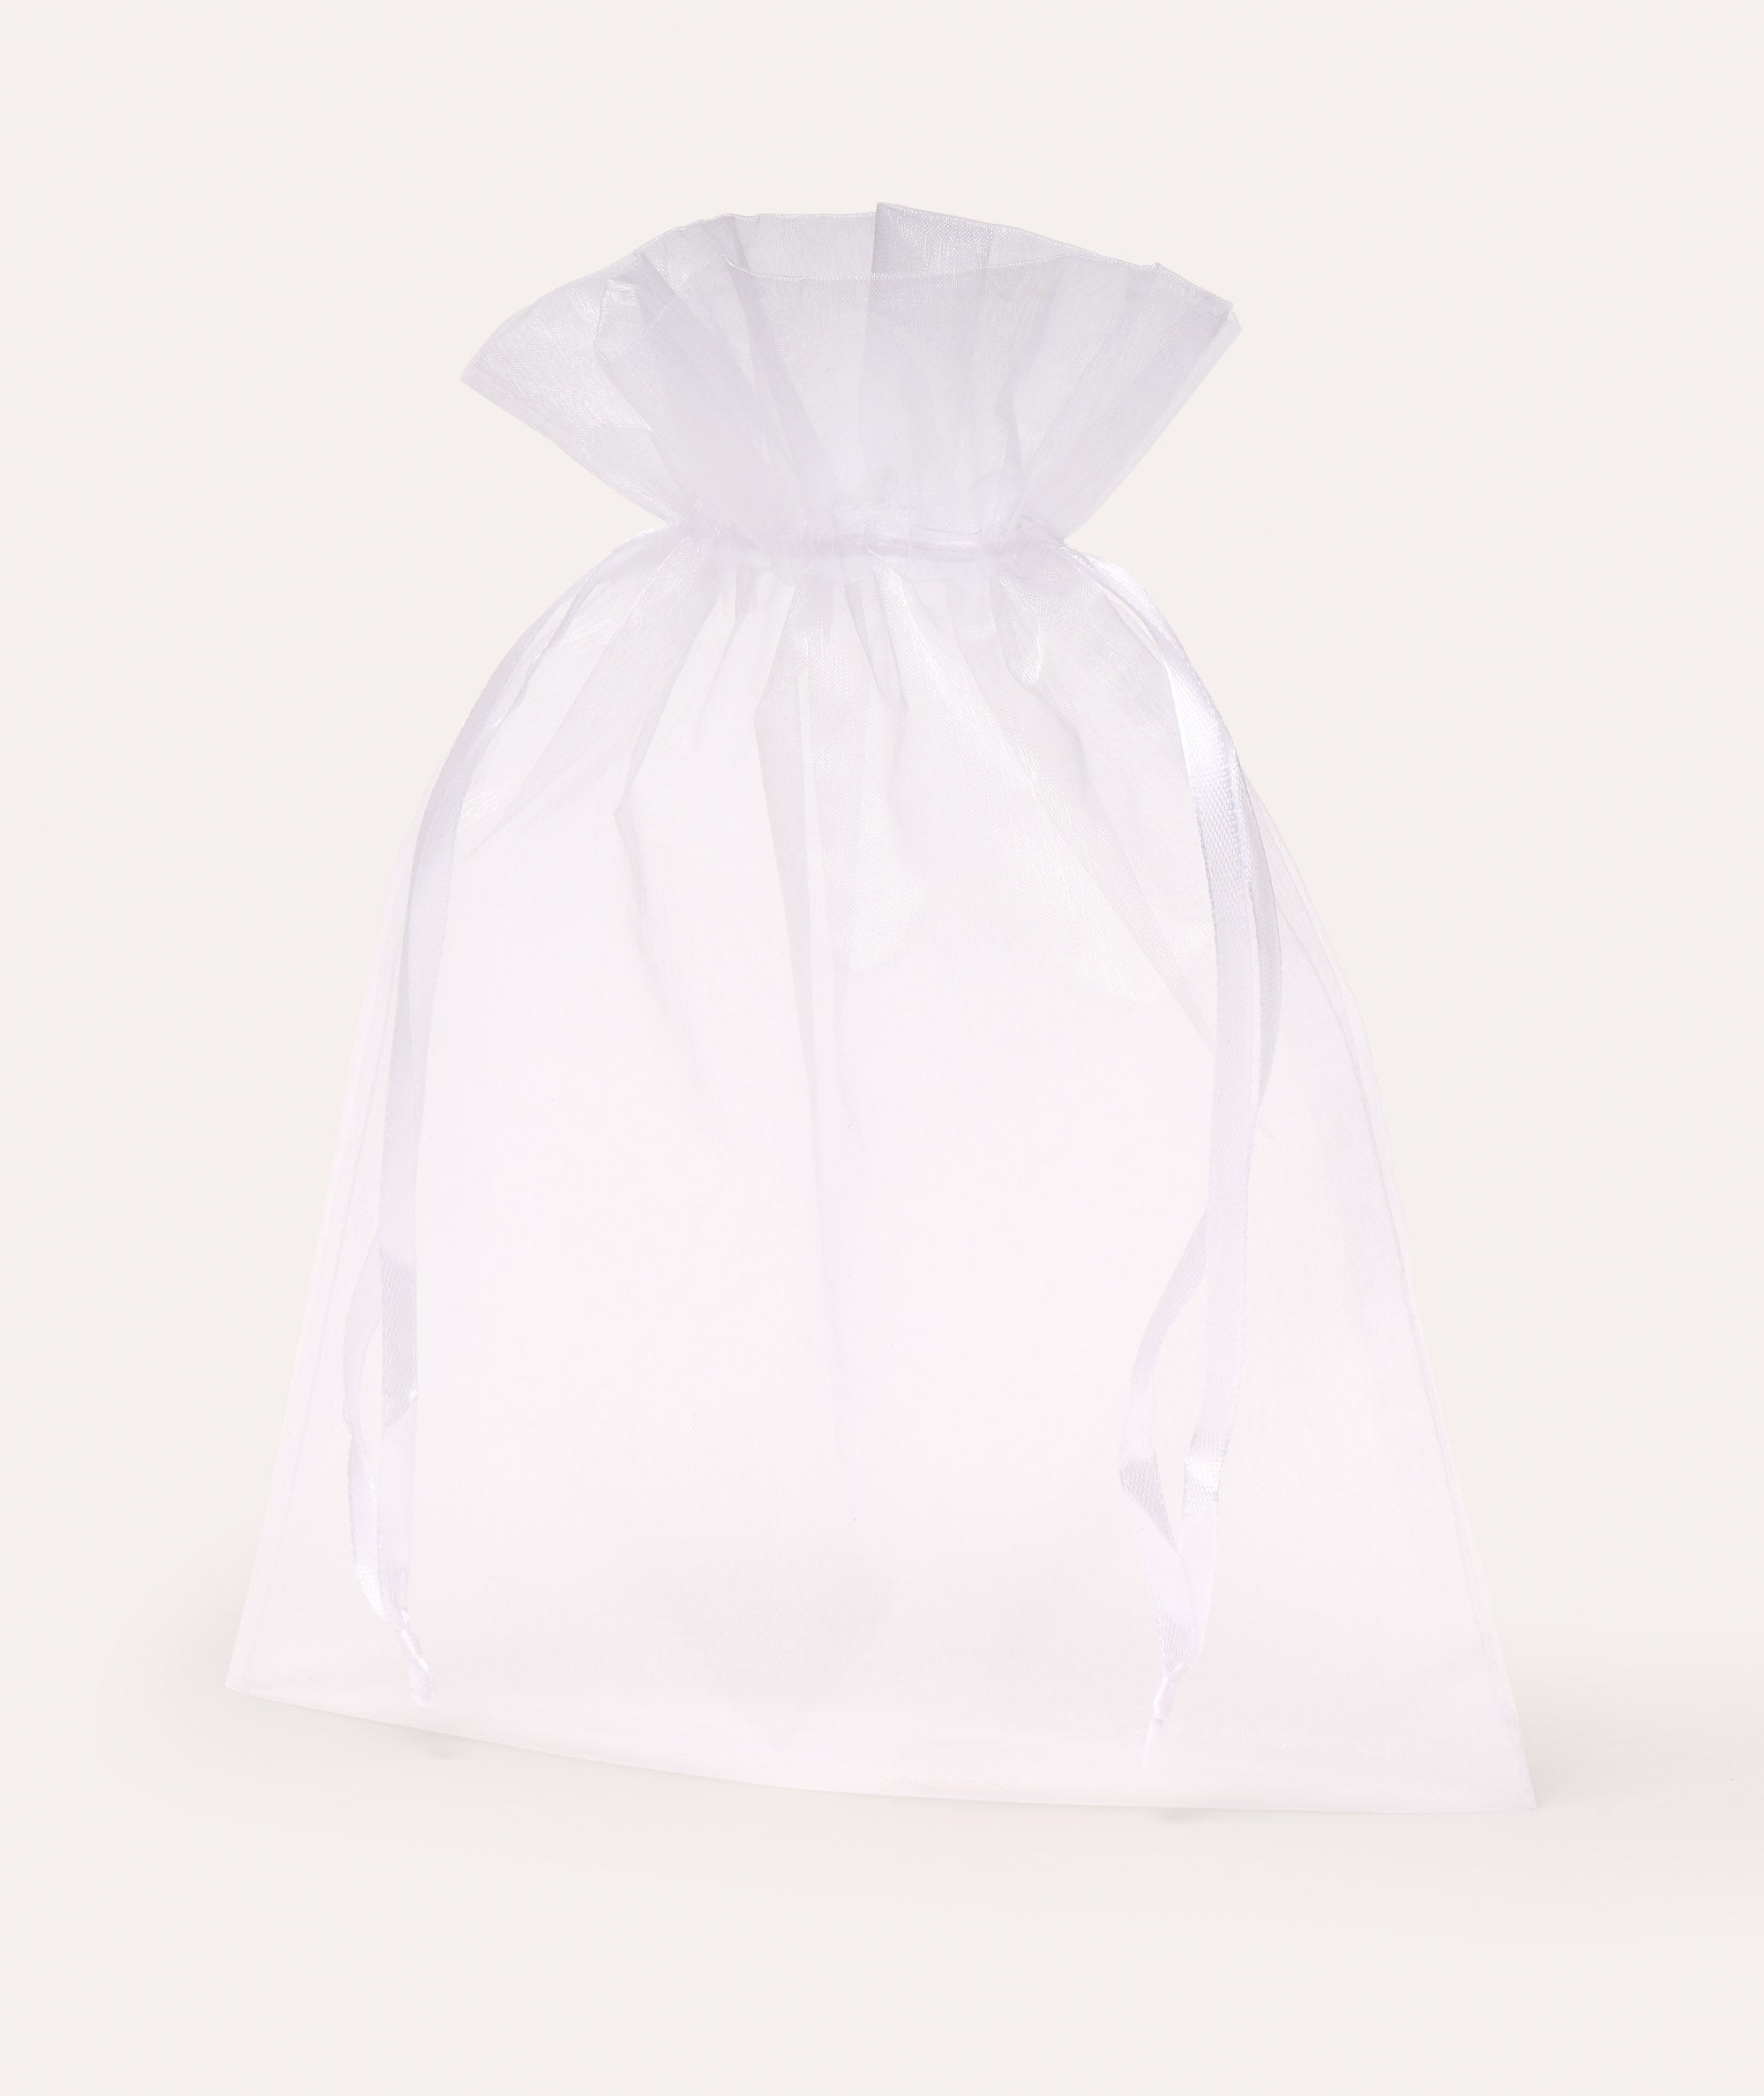 2 Piece Hand Care Set is packed in a white organza bag